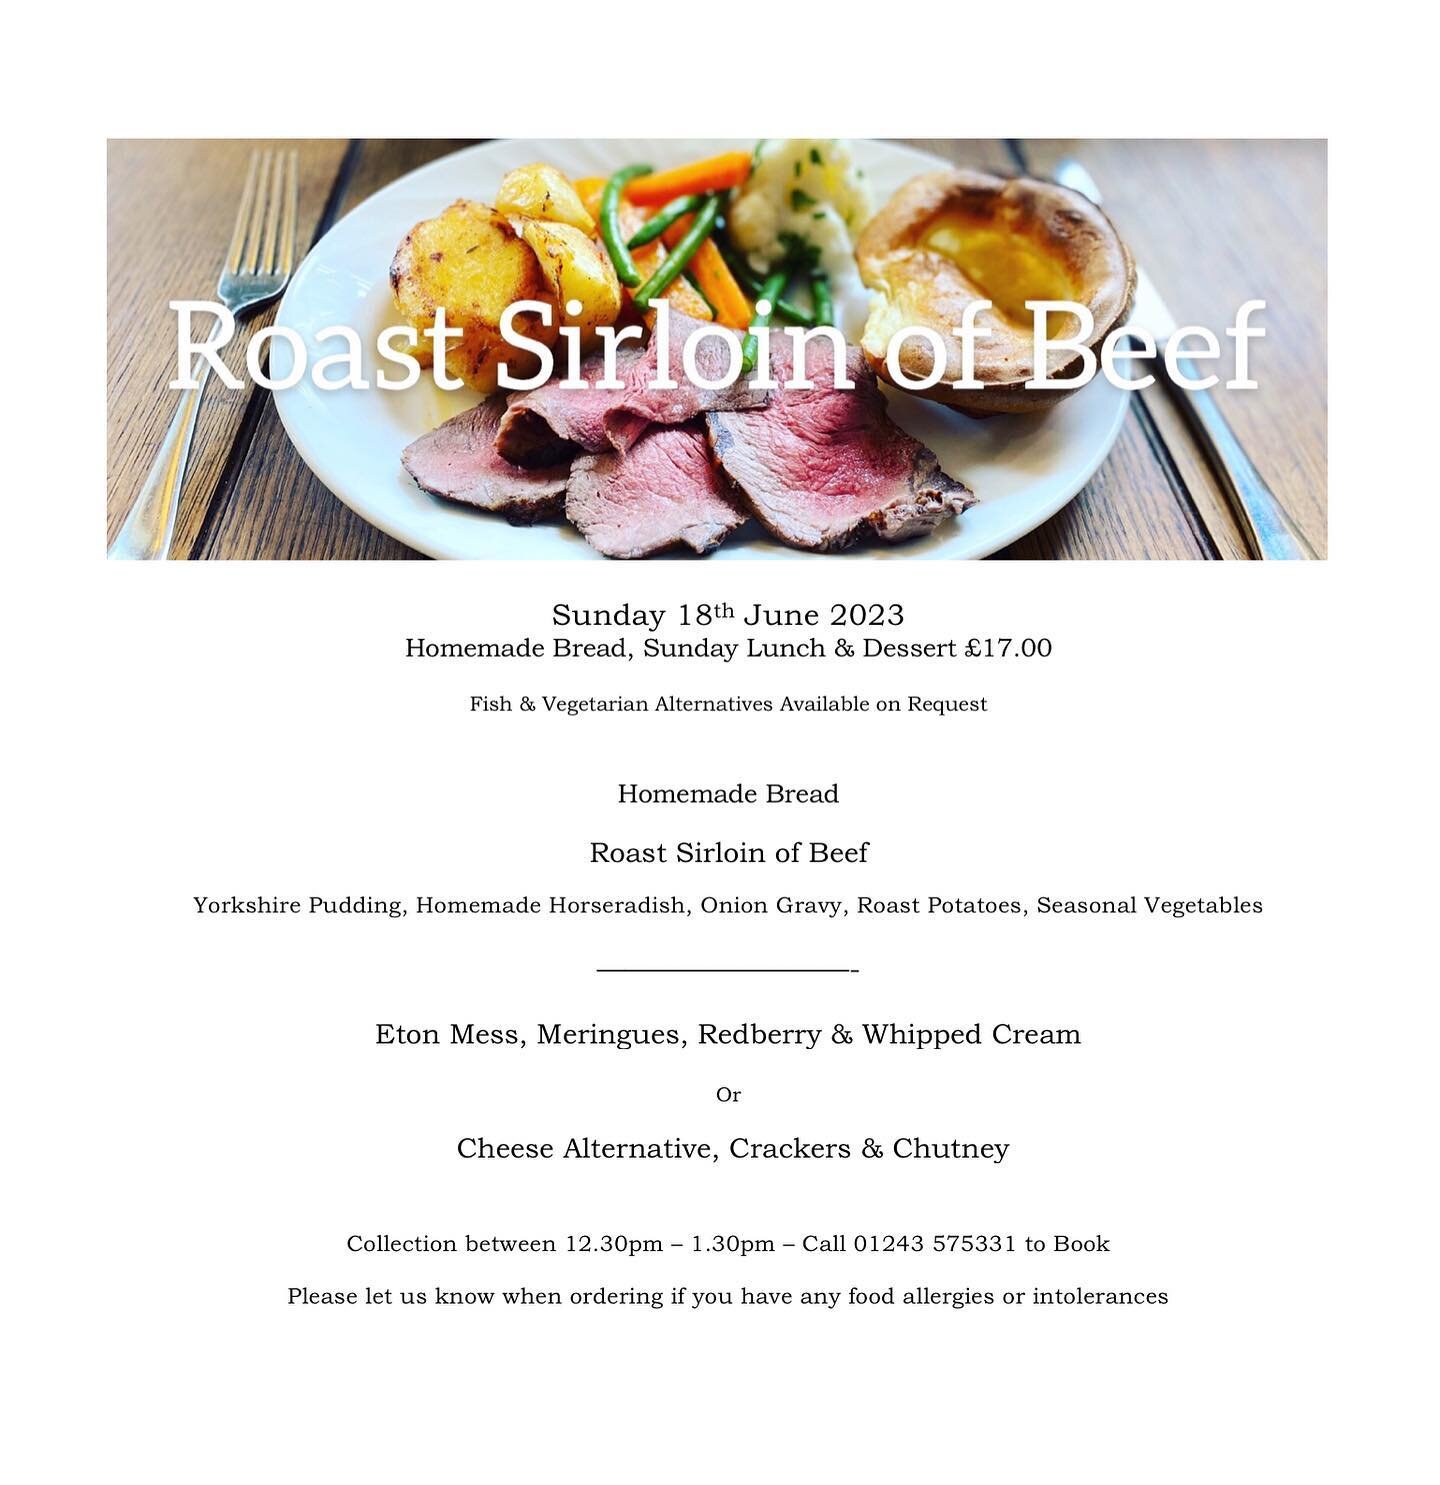 Sunday 18th June 2023 - Father&rsquo;s Day Take Away Lunch 🍴 Beef is BACK 🙌🏽 and we have you covered this Father&rsquo;s Day - enjoy our two-course Sunday lunch in the comfort of your own home ☀️ 
.
🌱 fish &amp; vegetarian alternative available 
